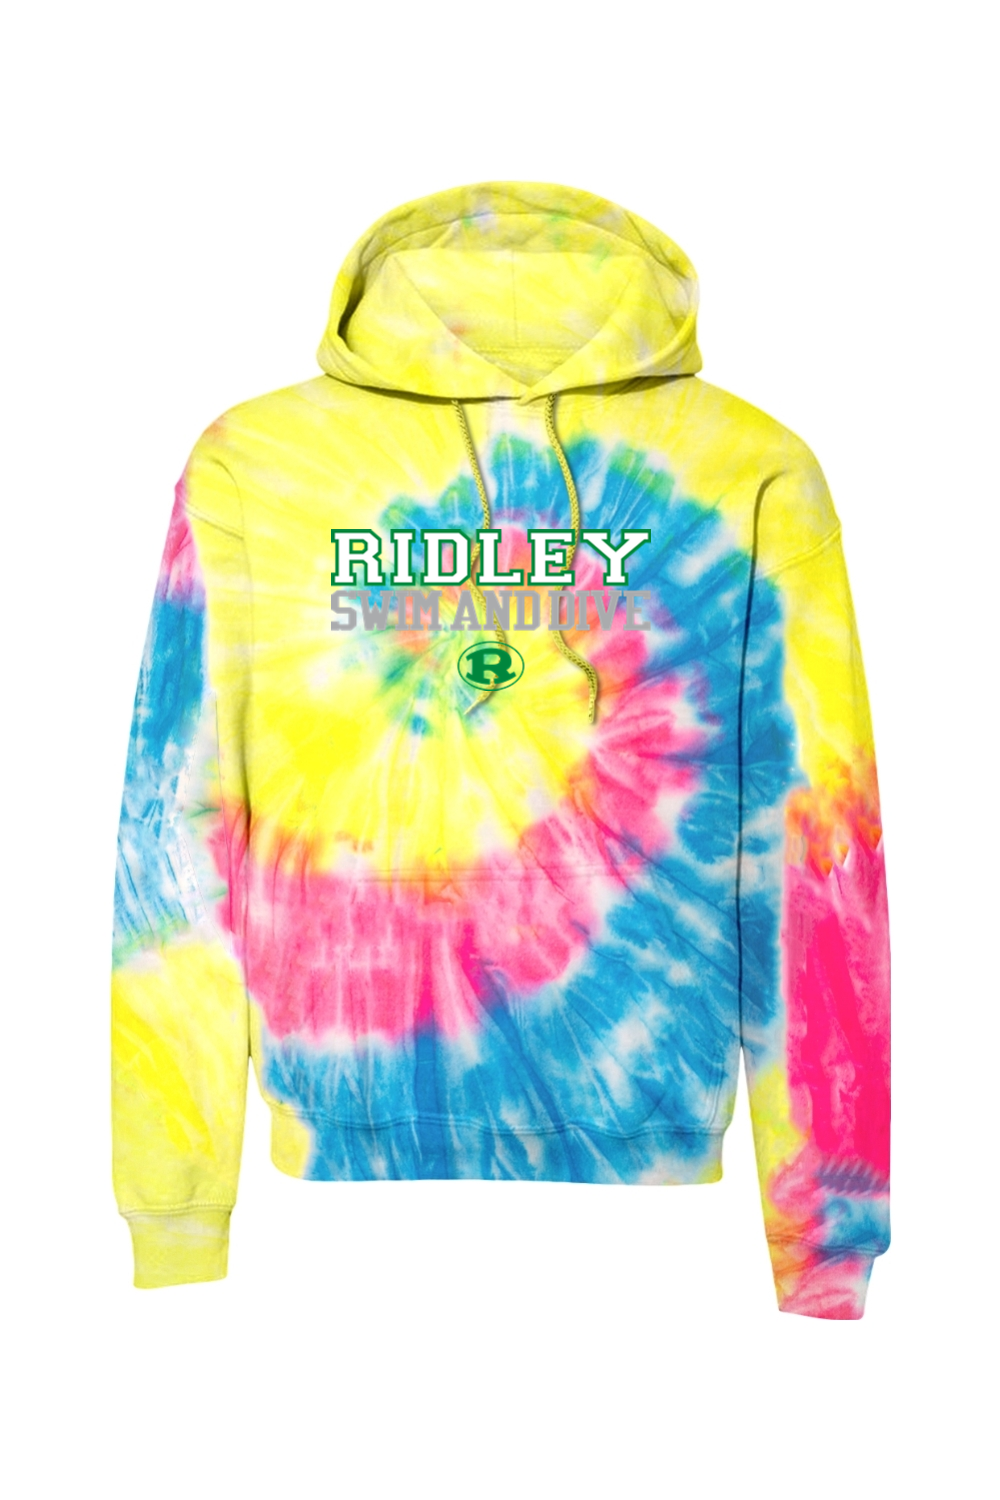 Ridley Swim and Dive Tie-Dye Pullover Hooded Sweatshirt